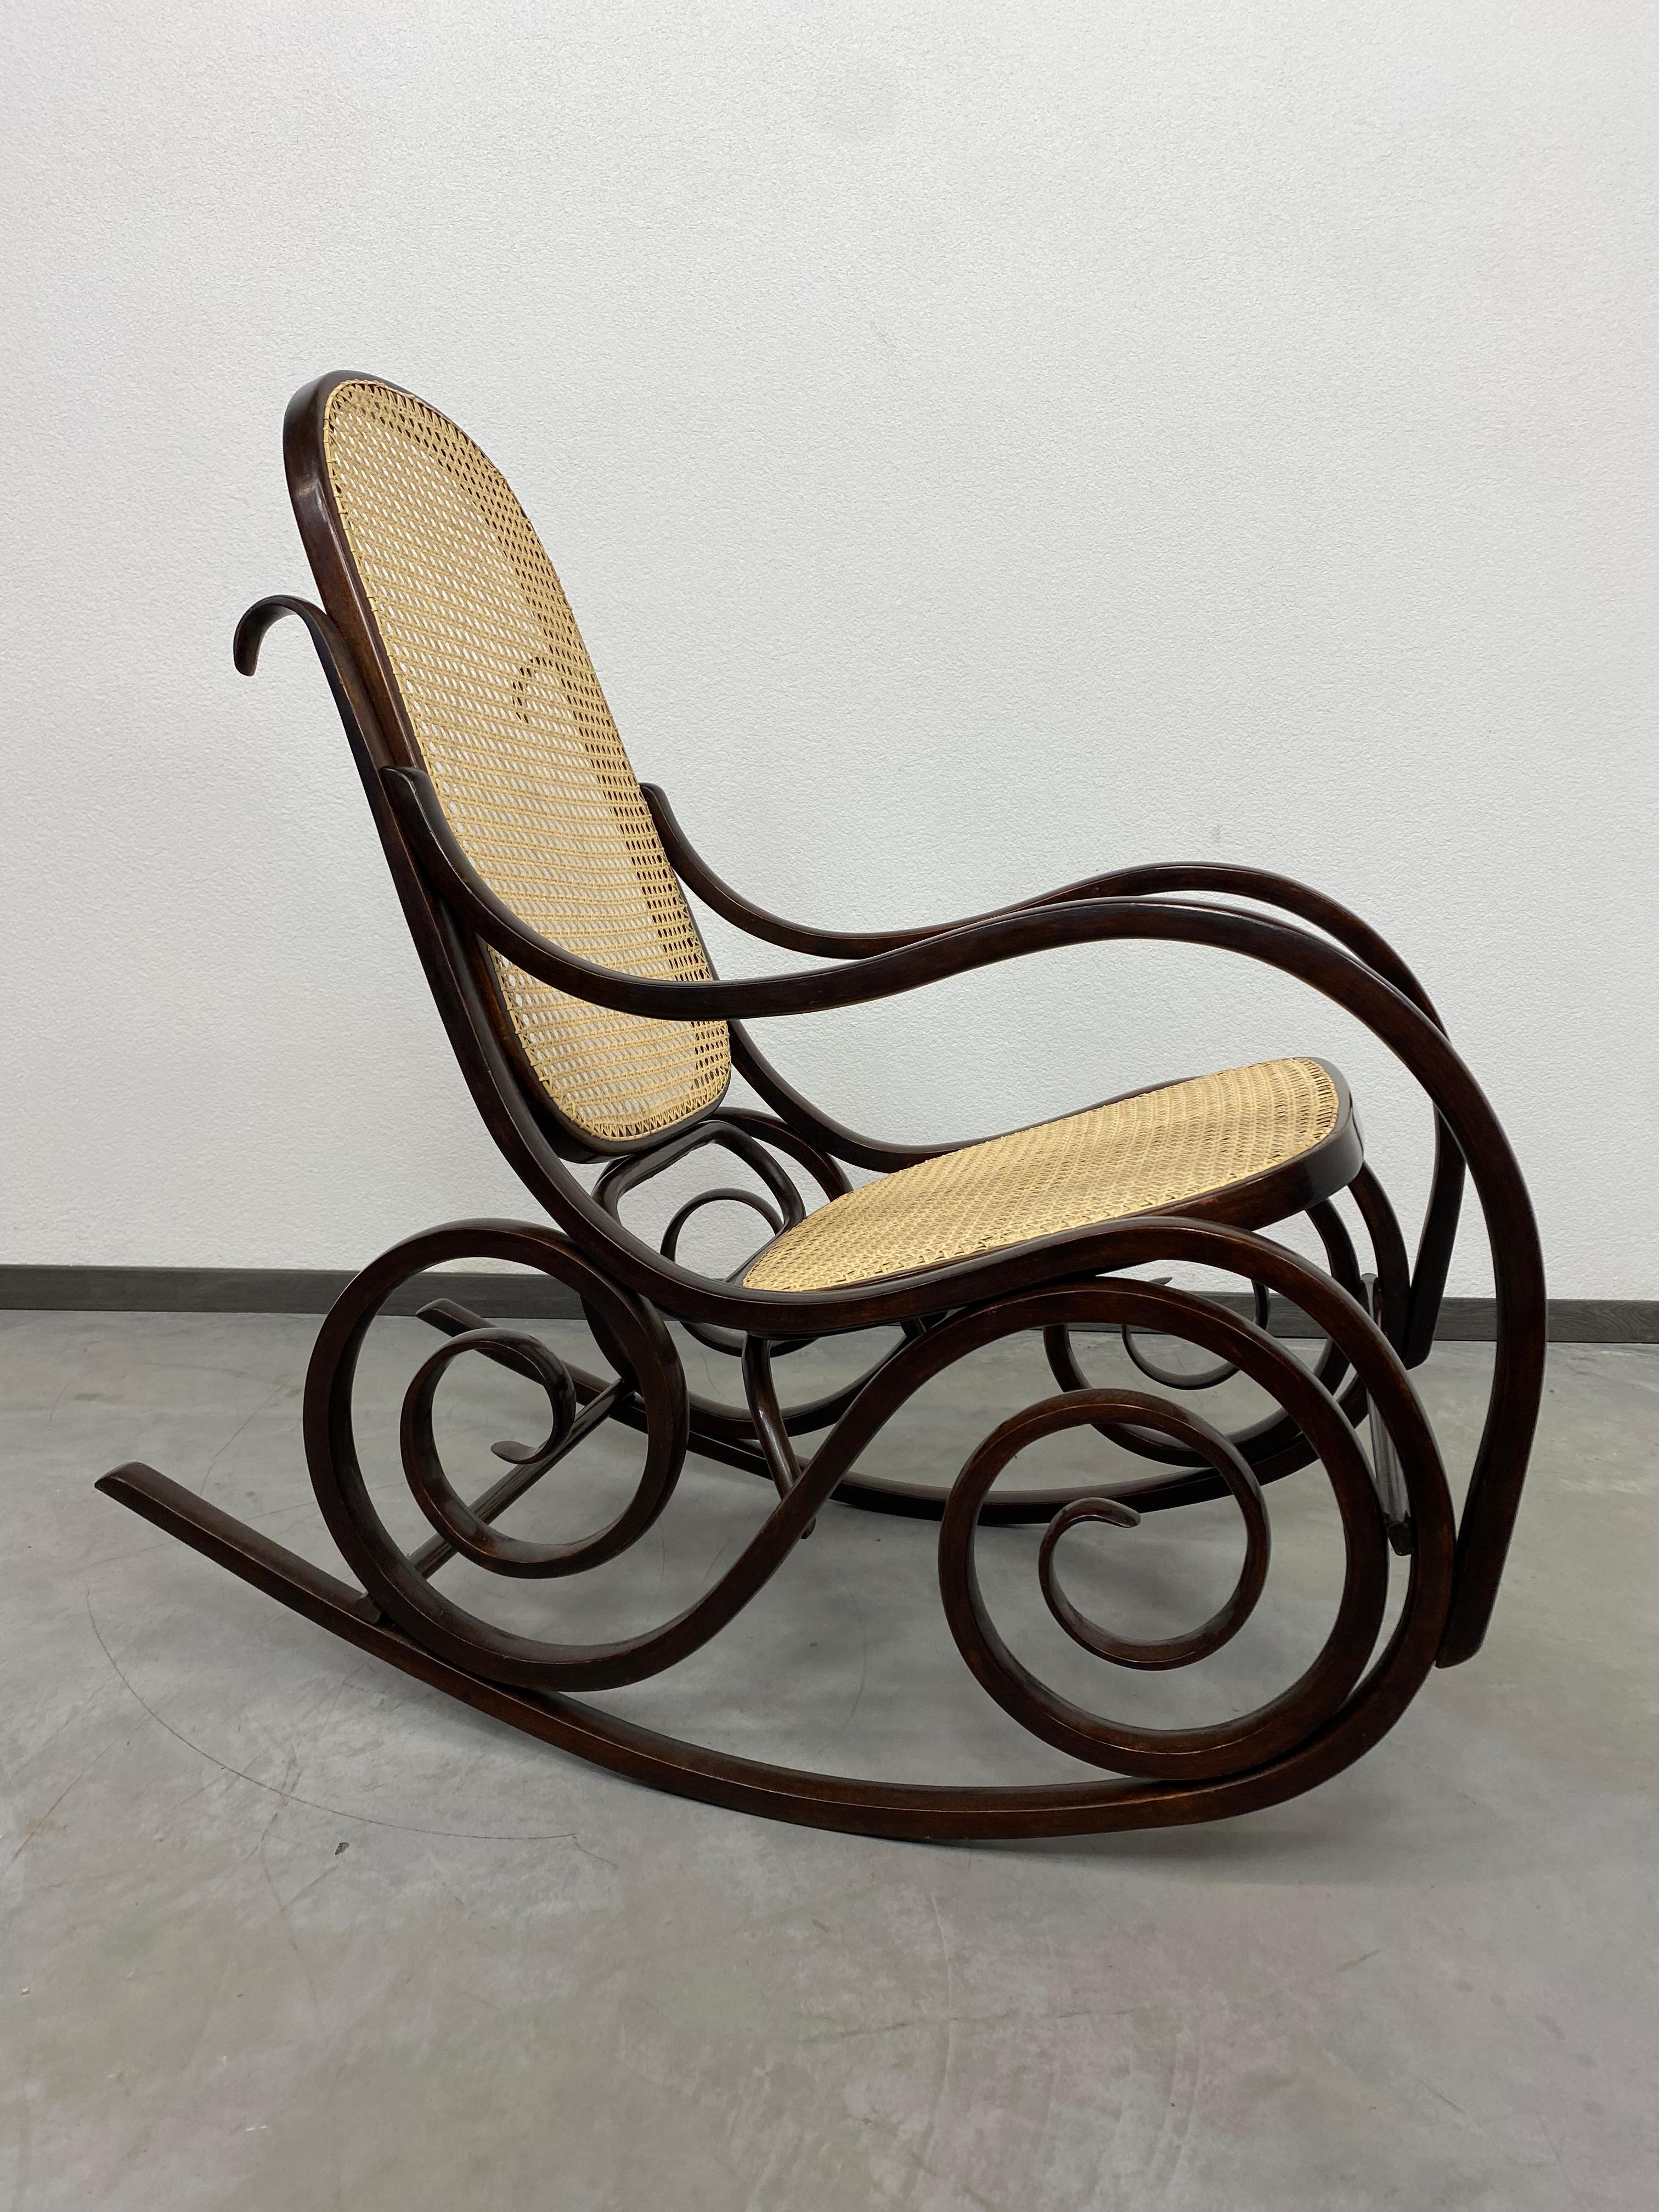 Thonet rocking chair after professional renovation with new handmade rattan seat and backrest